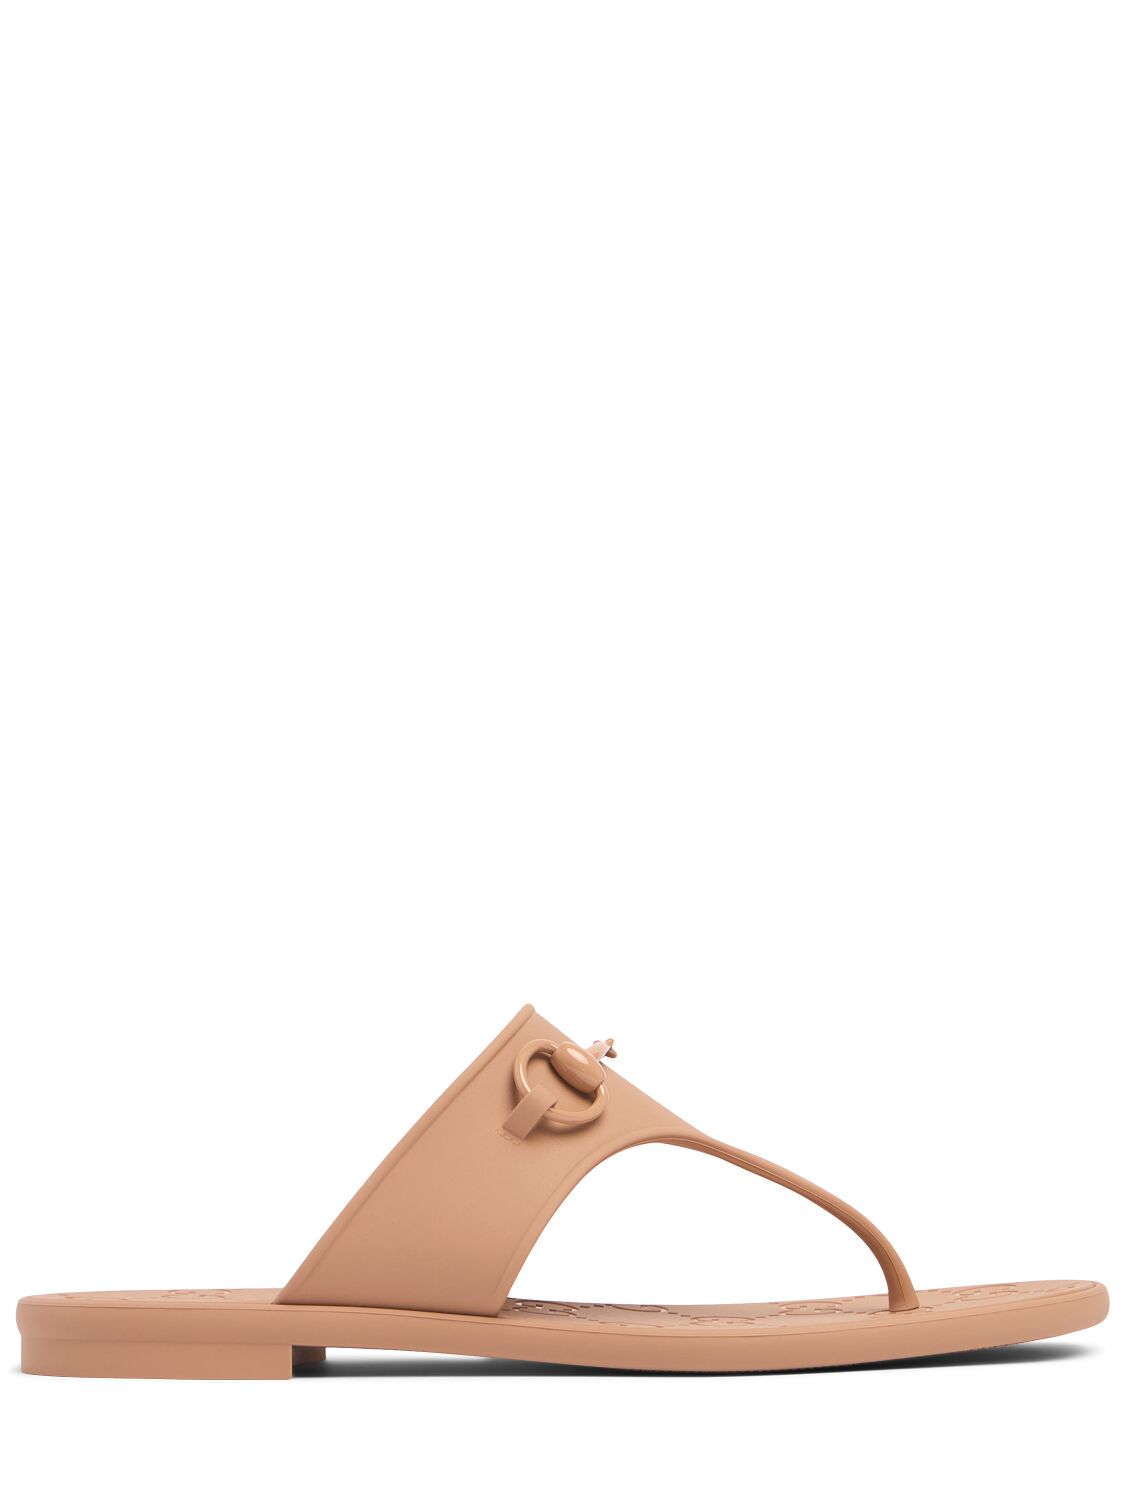 Gucci Minorca Rubber Thong Sandals In Vintage Camel